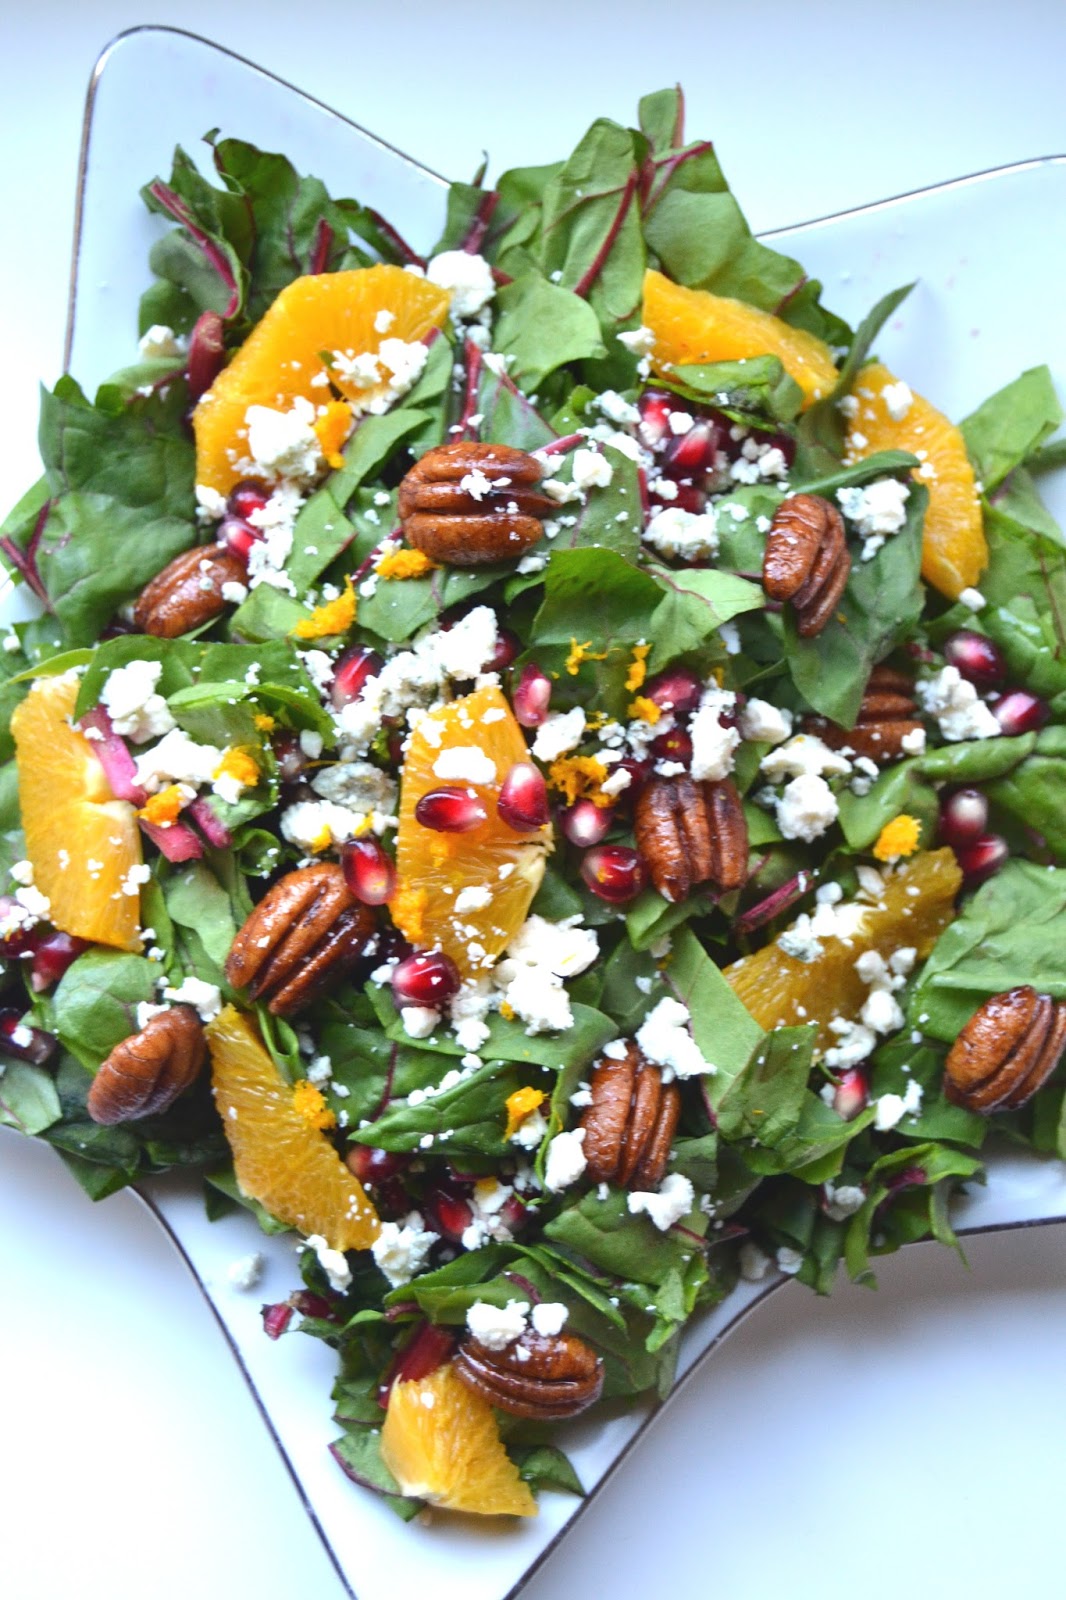 The Nutritionist Reviews: Christmas Salad